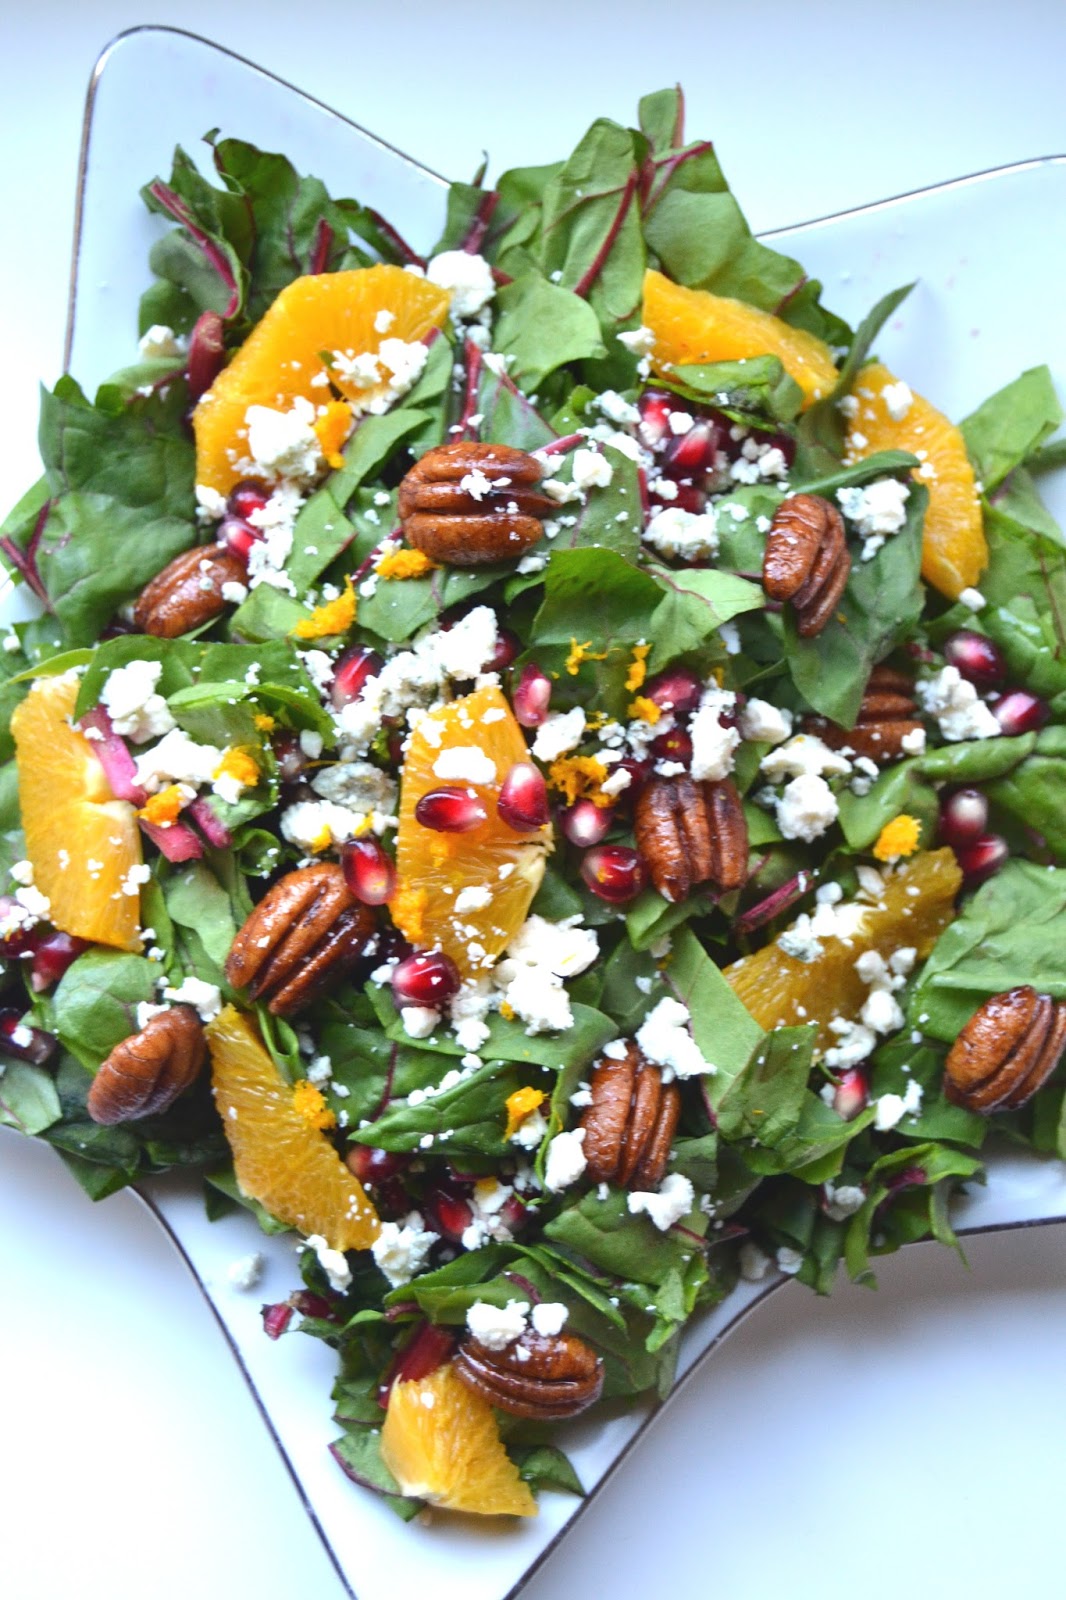 The Nutritionist Reviews: Christmas Salad